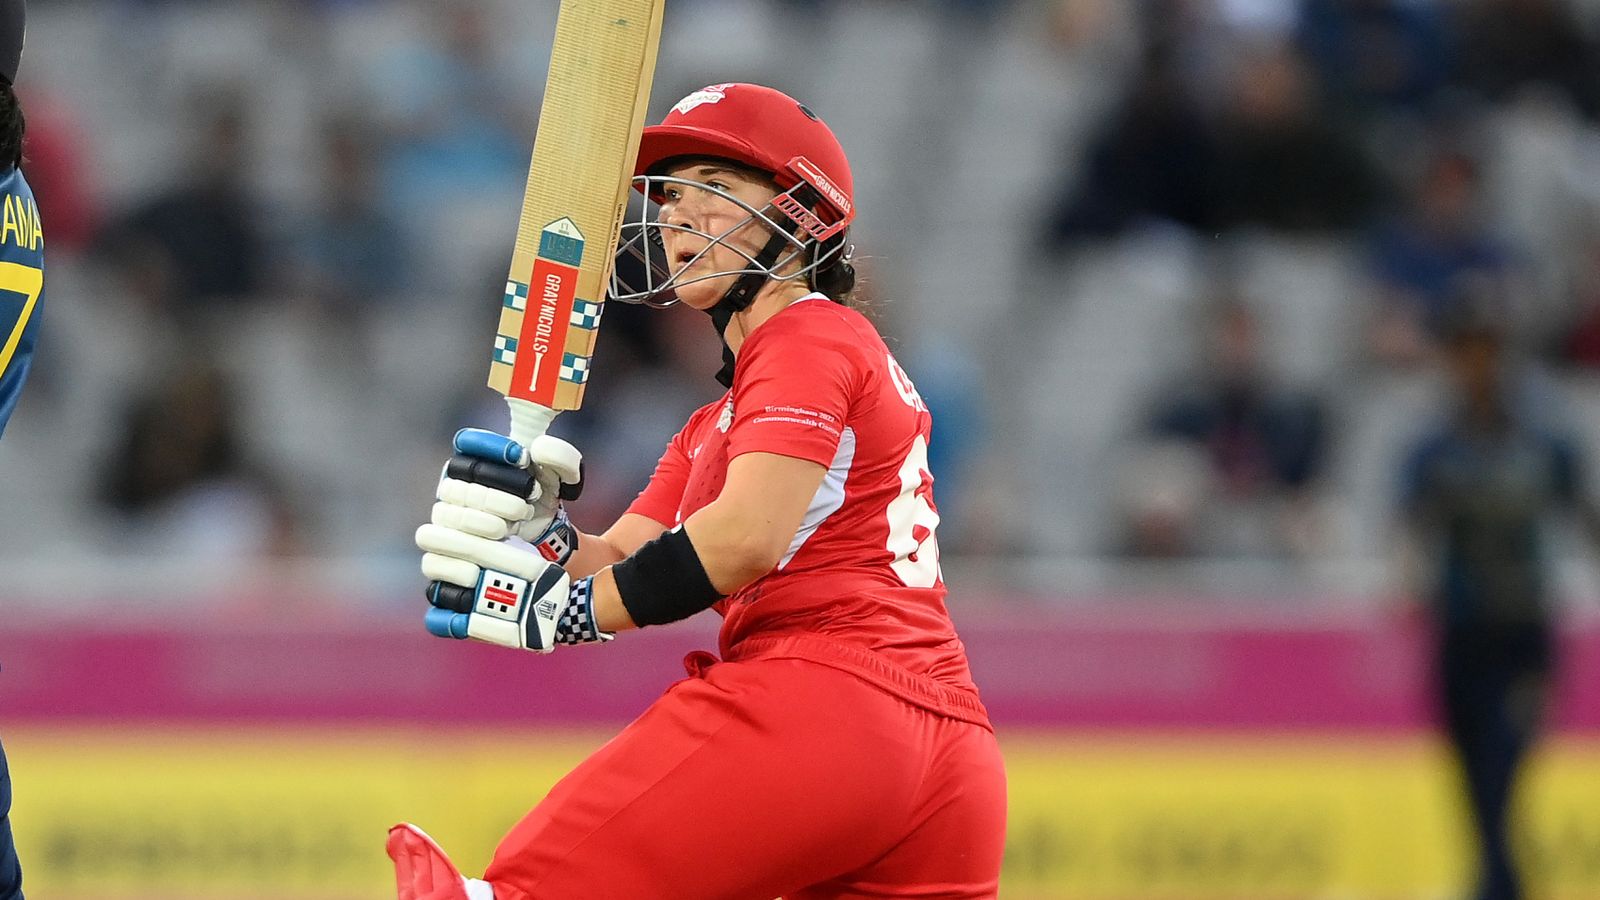 Commonwealth Games: Alice Capsey steers England to win over Sri Lanka in opening match